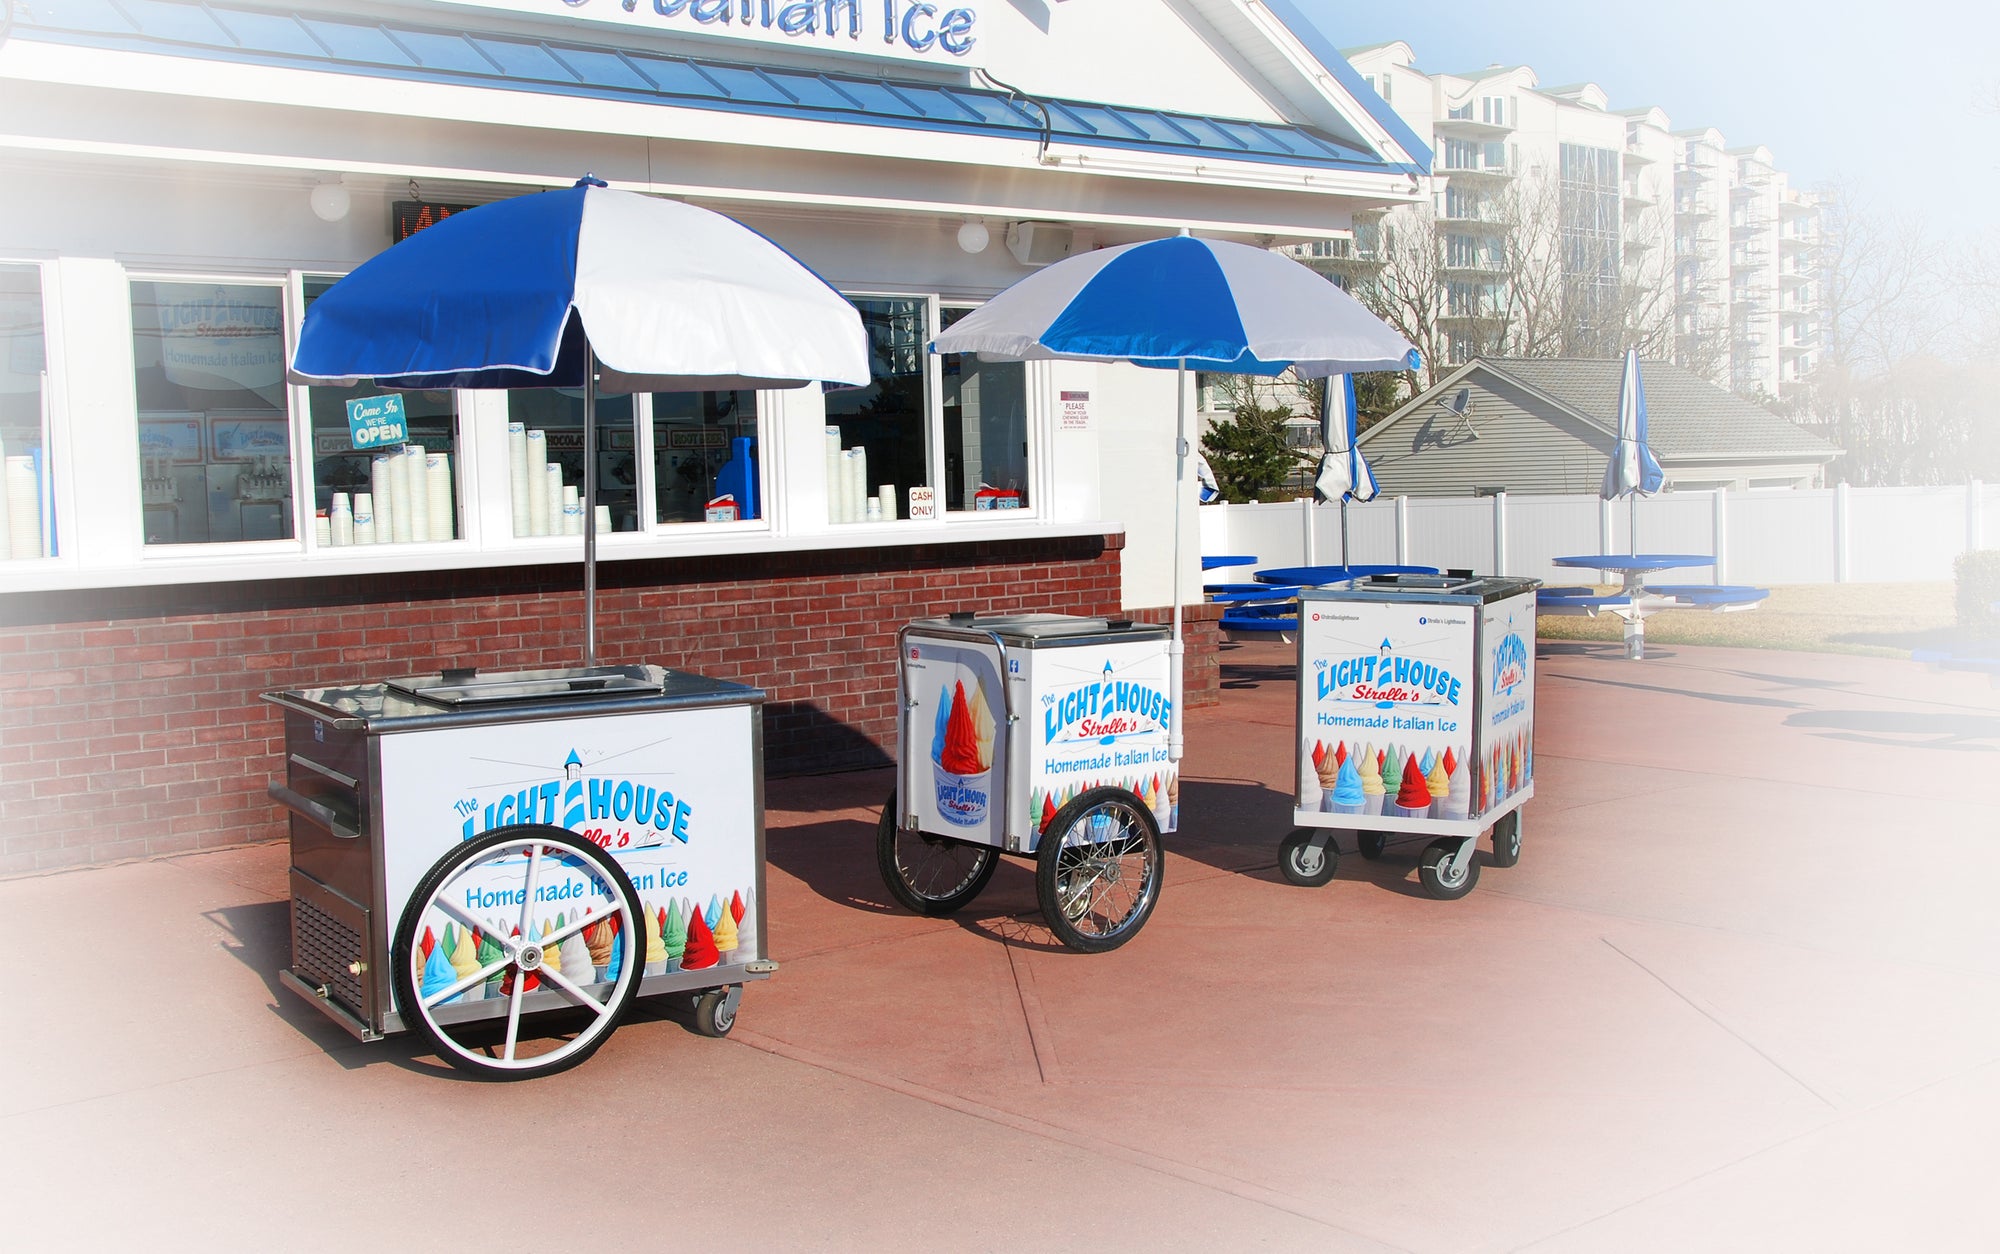 Strollo's Lighthouse homemade Italian Ice carts with blue and white umbrellas